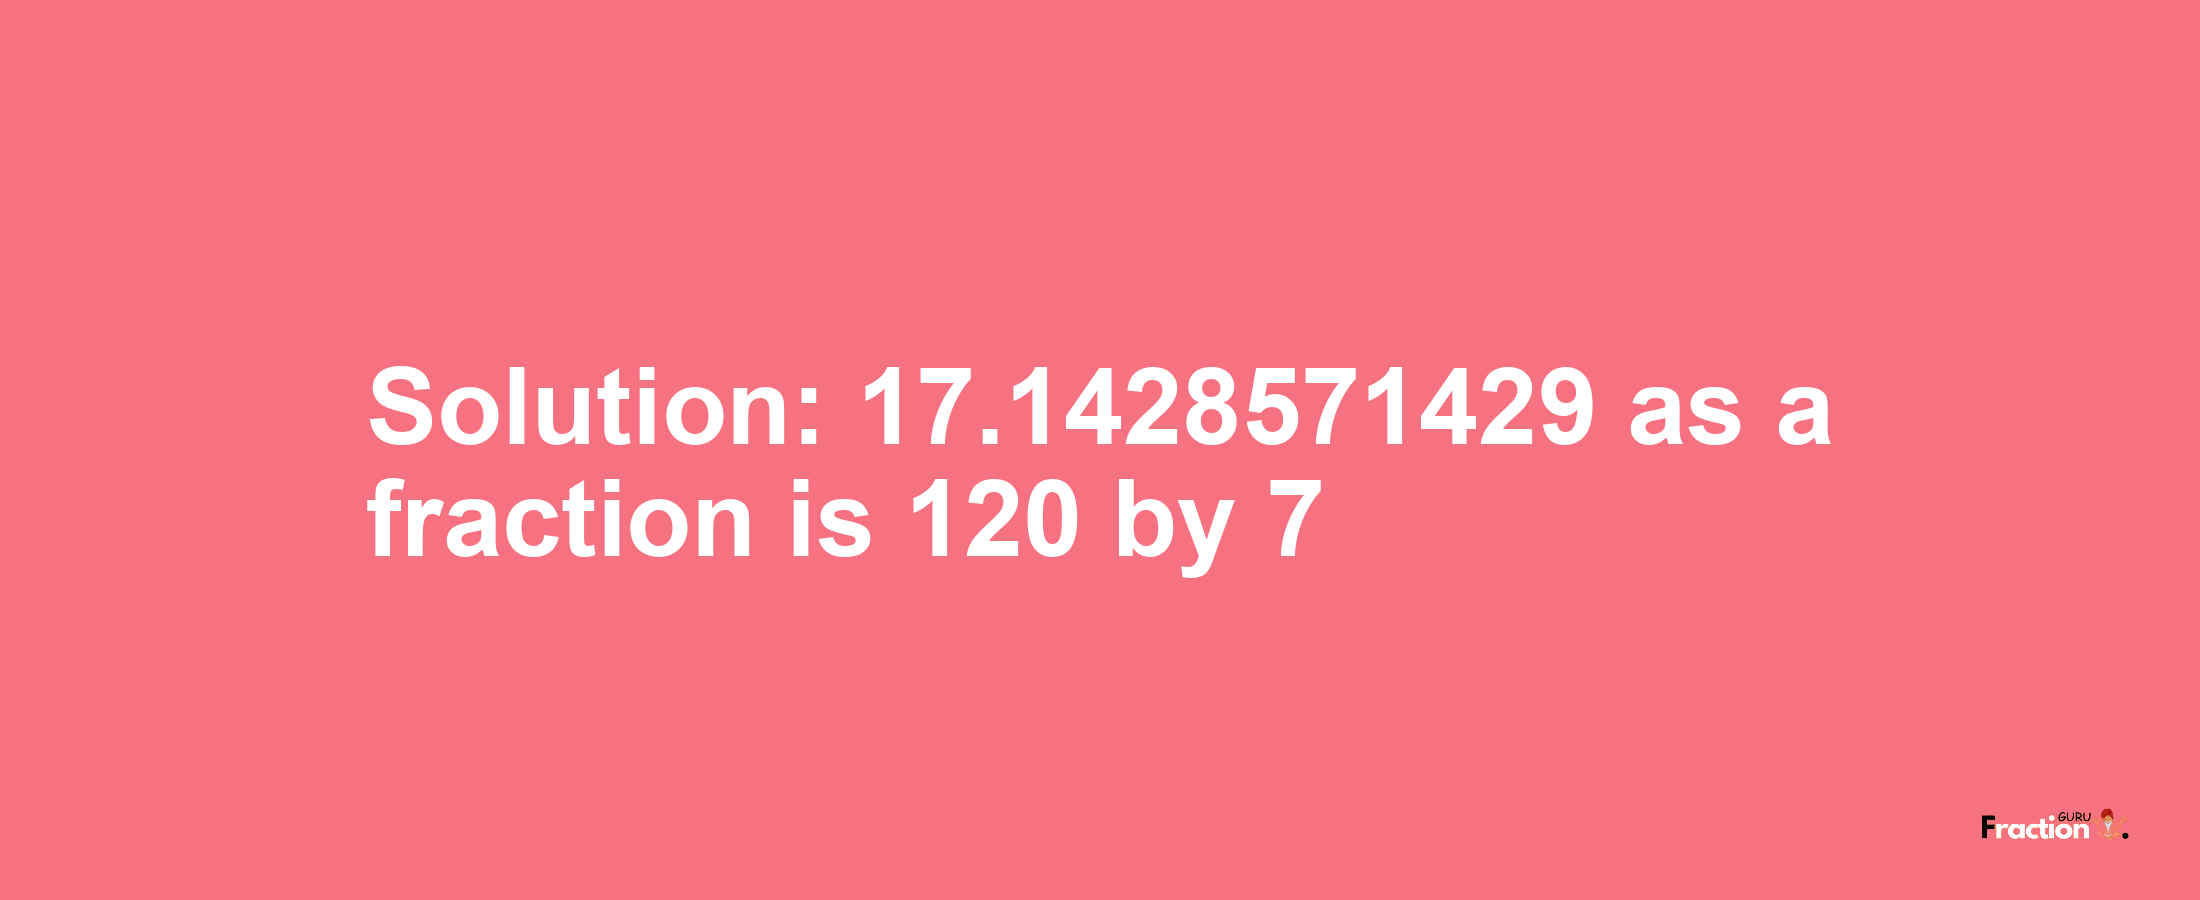 Solution:17.1428571429 as a fraction is 120/7